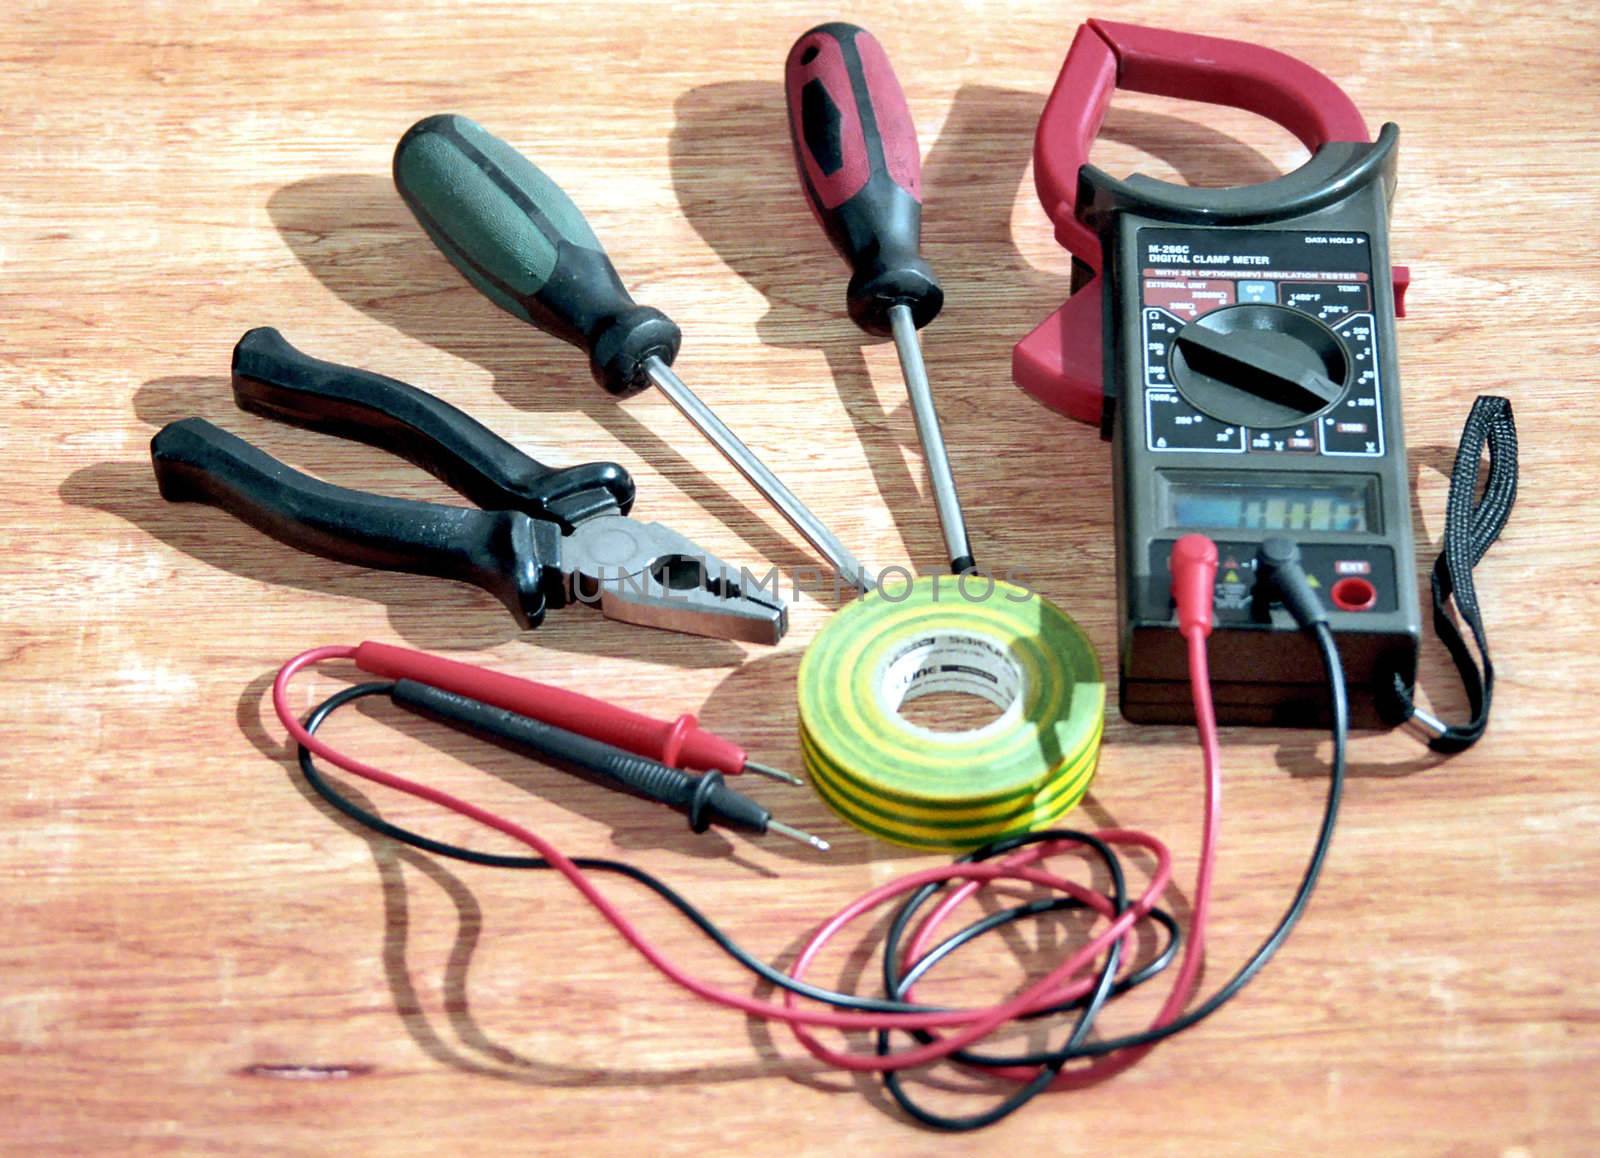 Electrician tools and digital clamp meter on wooden surface